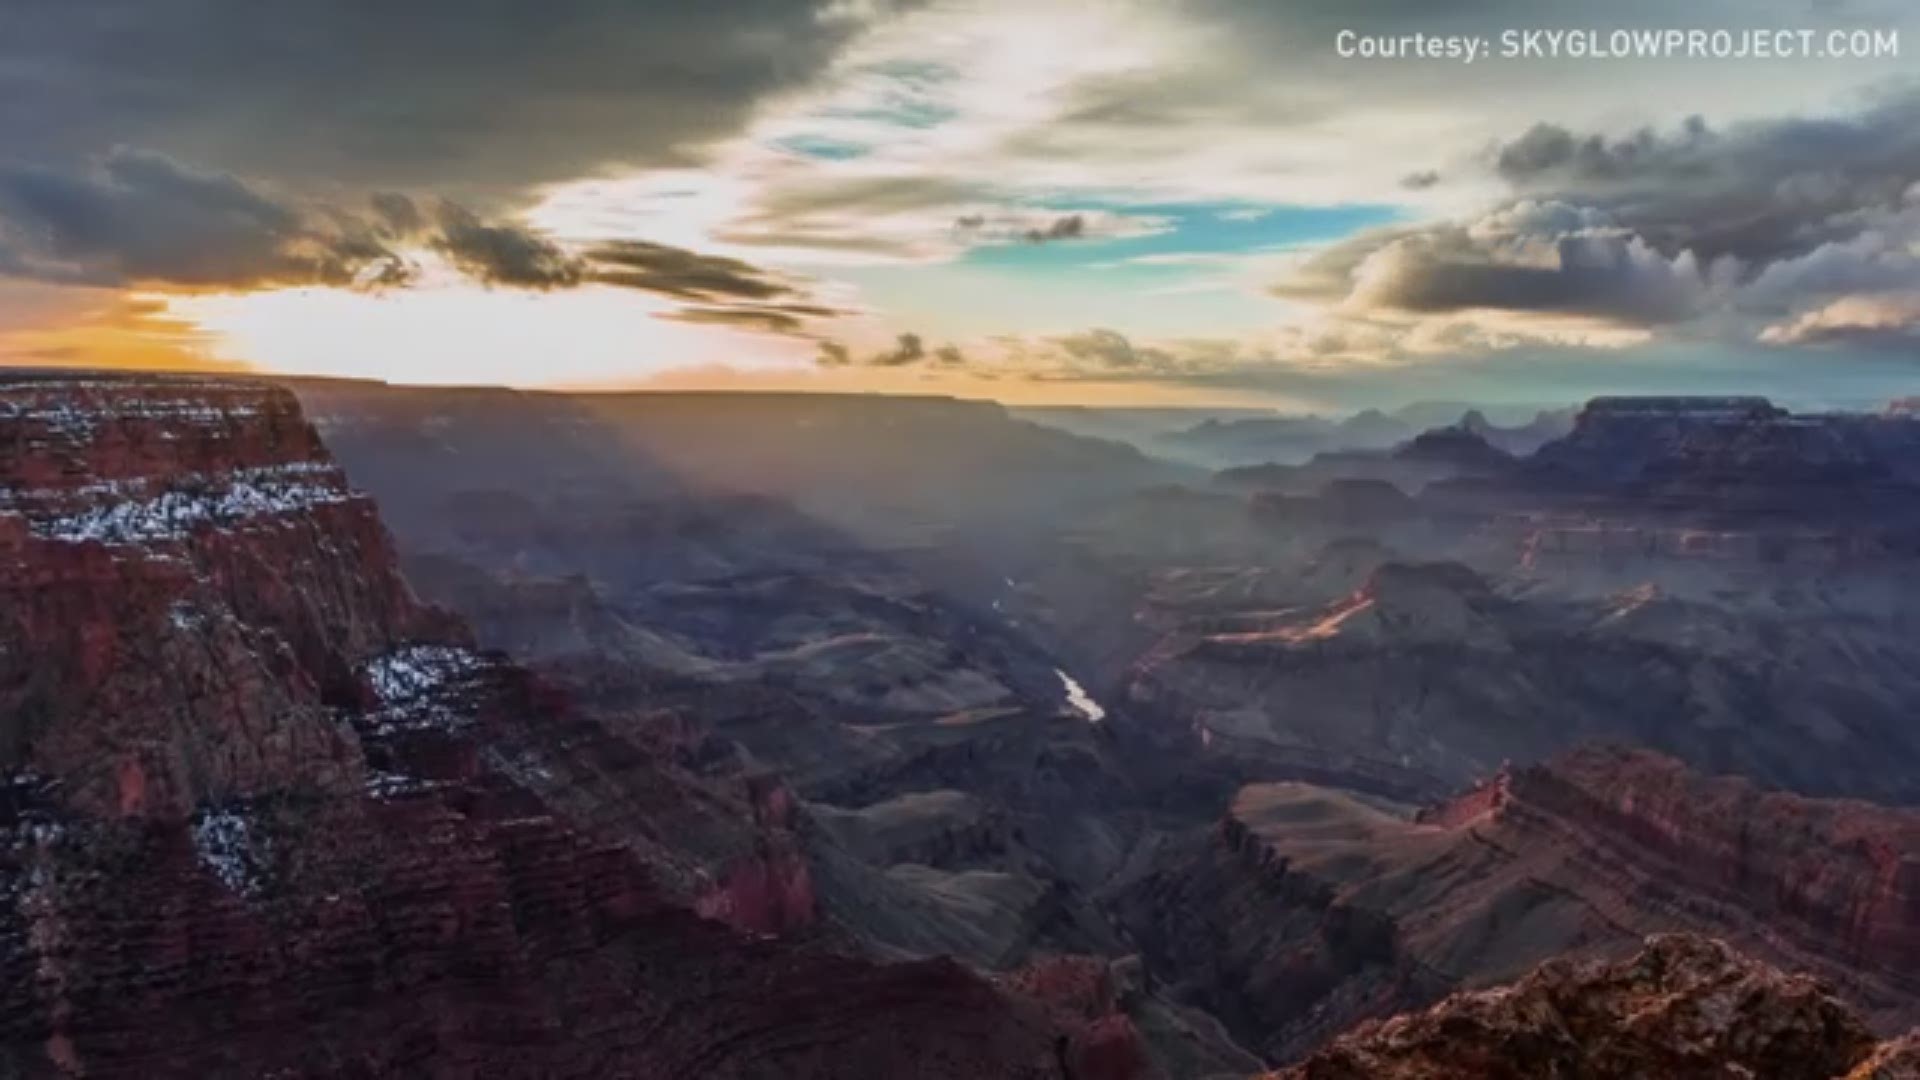 The SKYGLOW project captured the Grand Canyon in rare form.